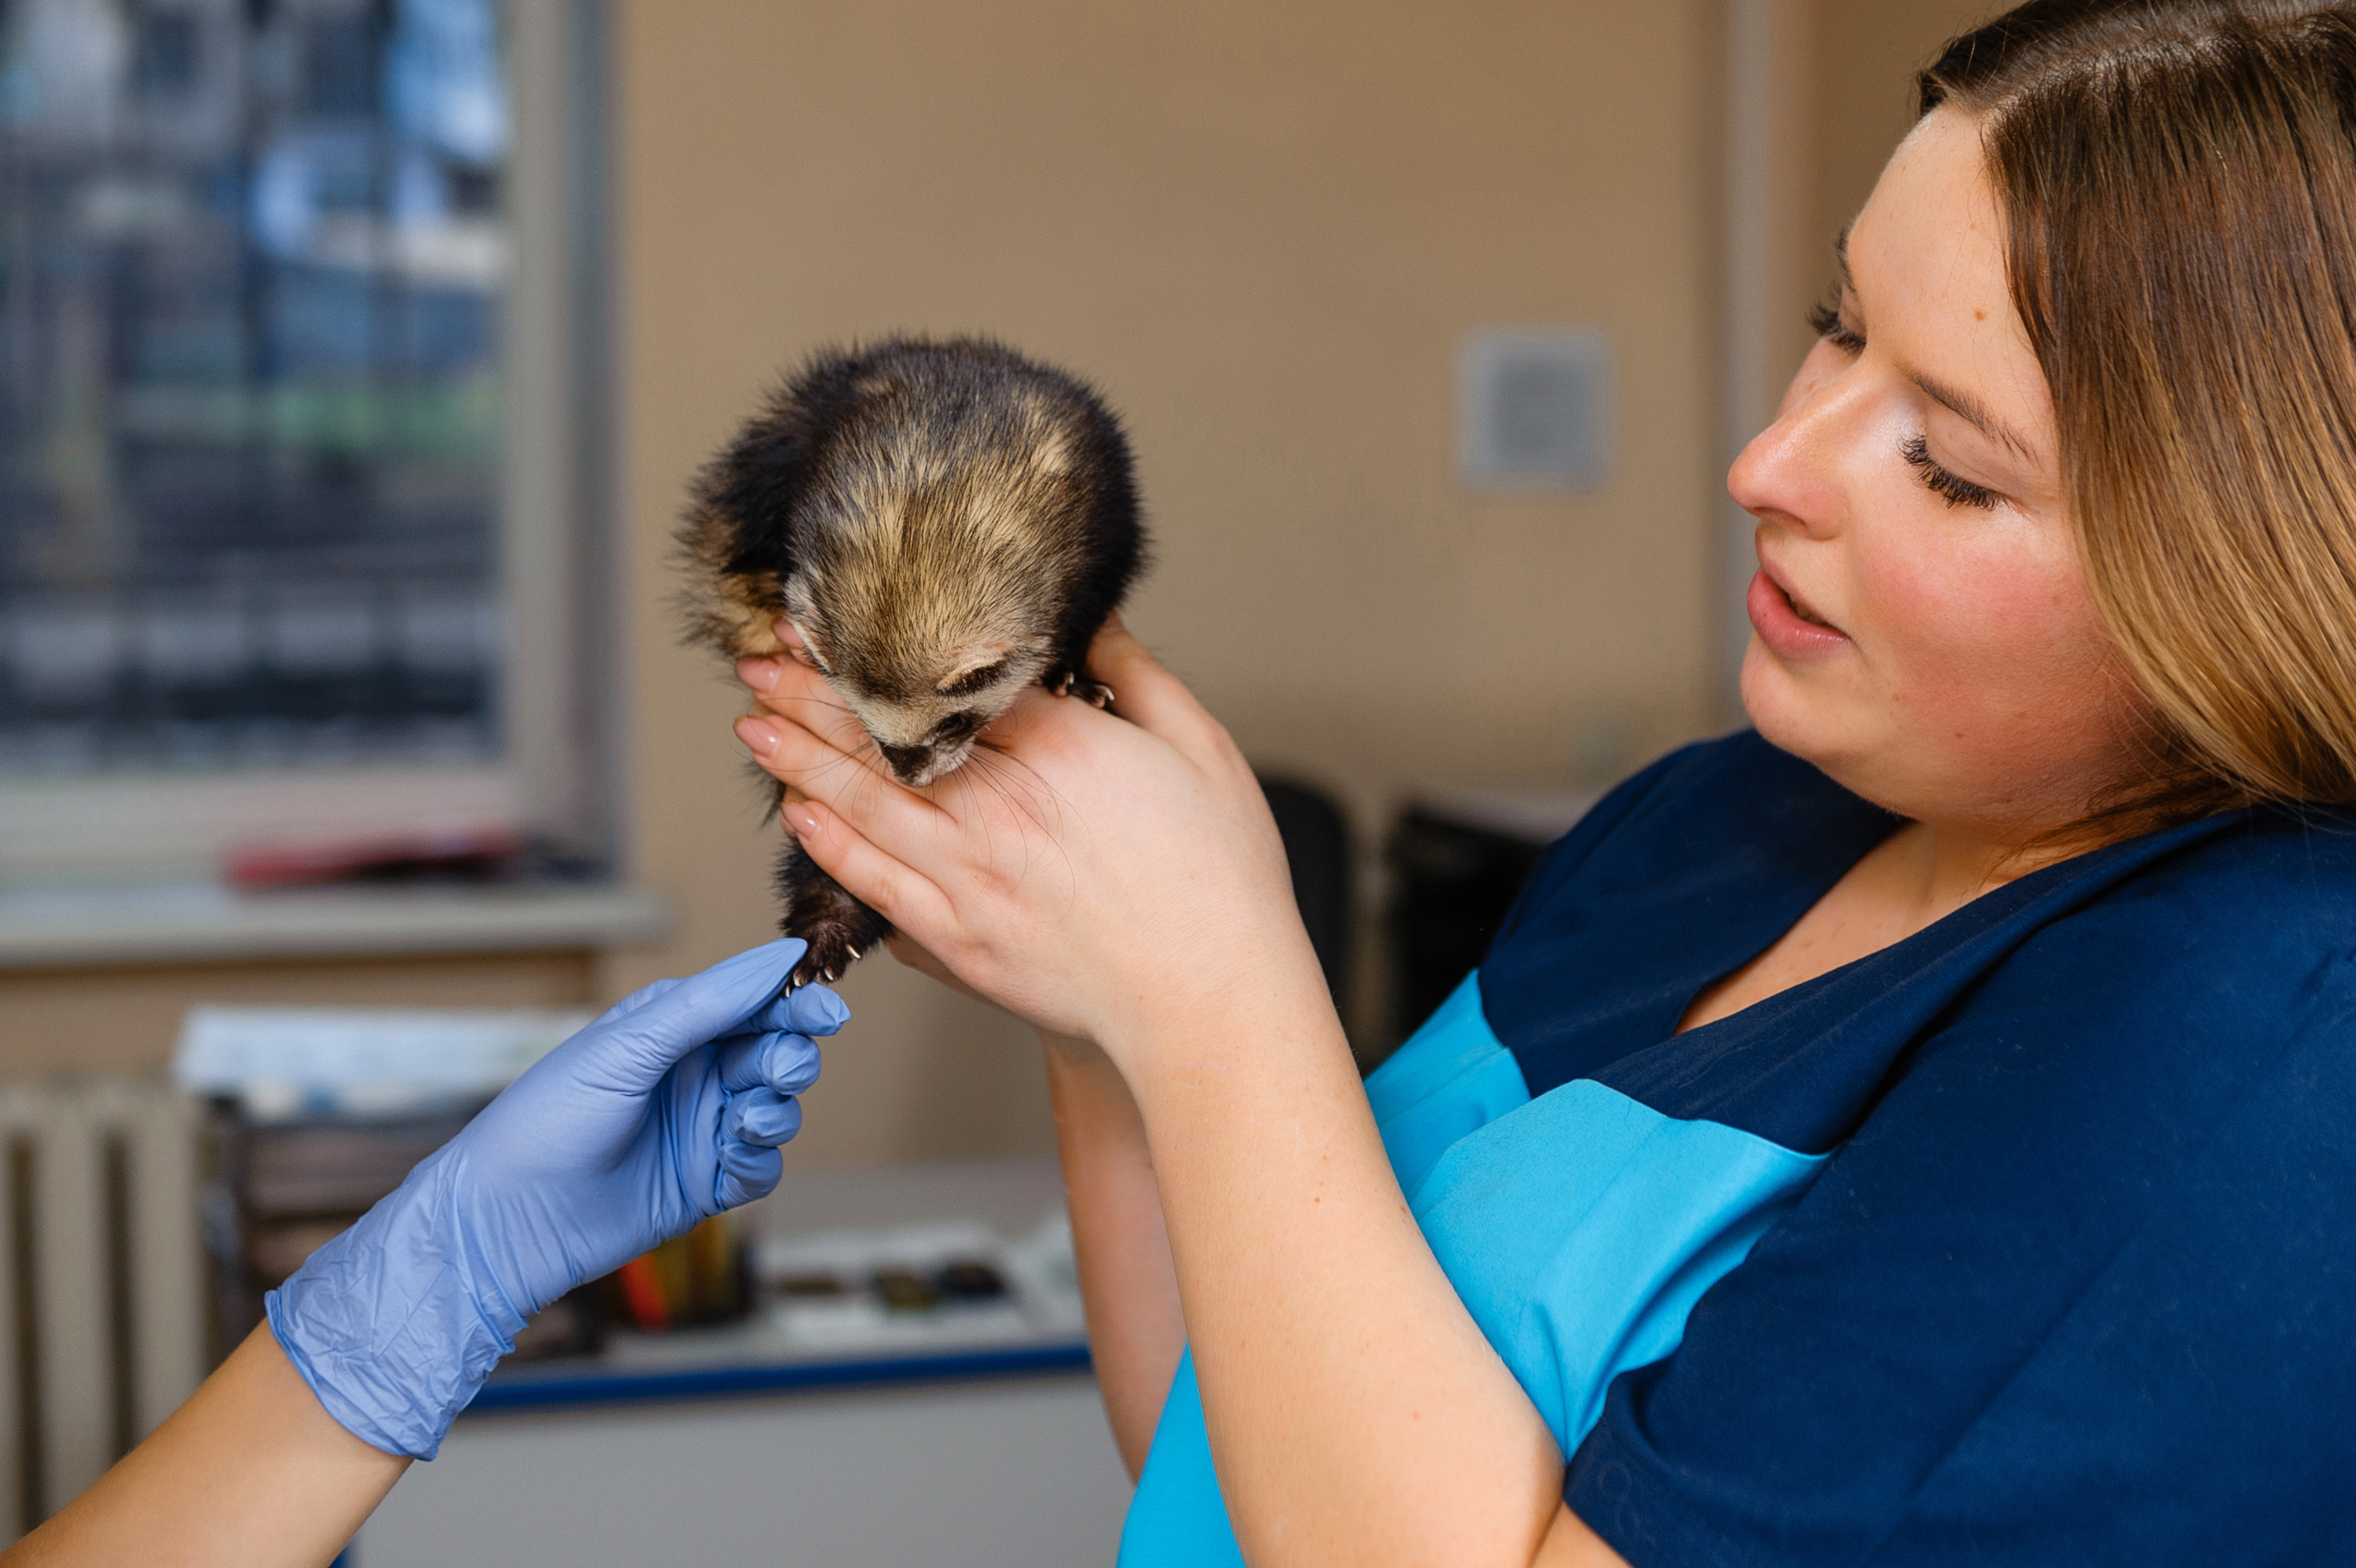 Urolithiasis: Diagnosing Urinary Tract Obstructions in Ferrets